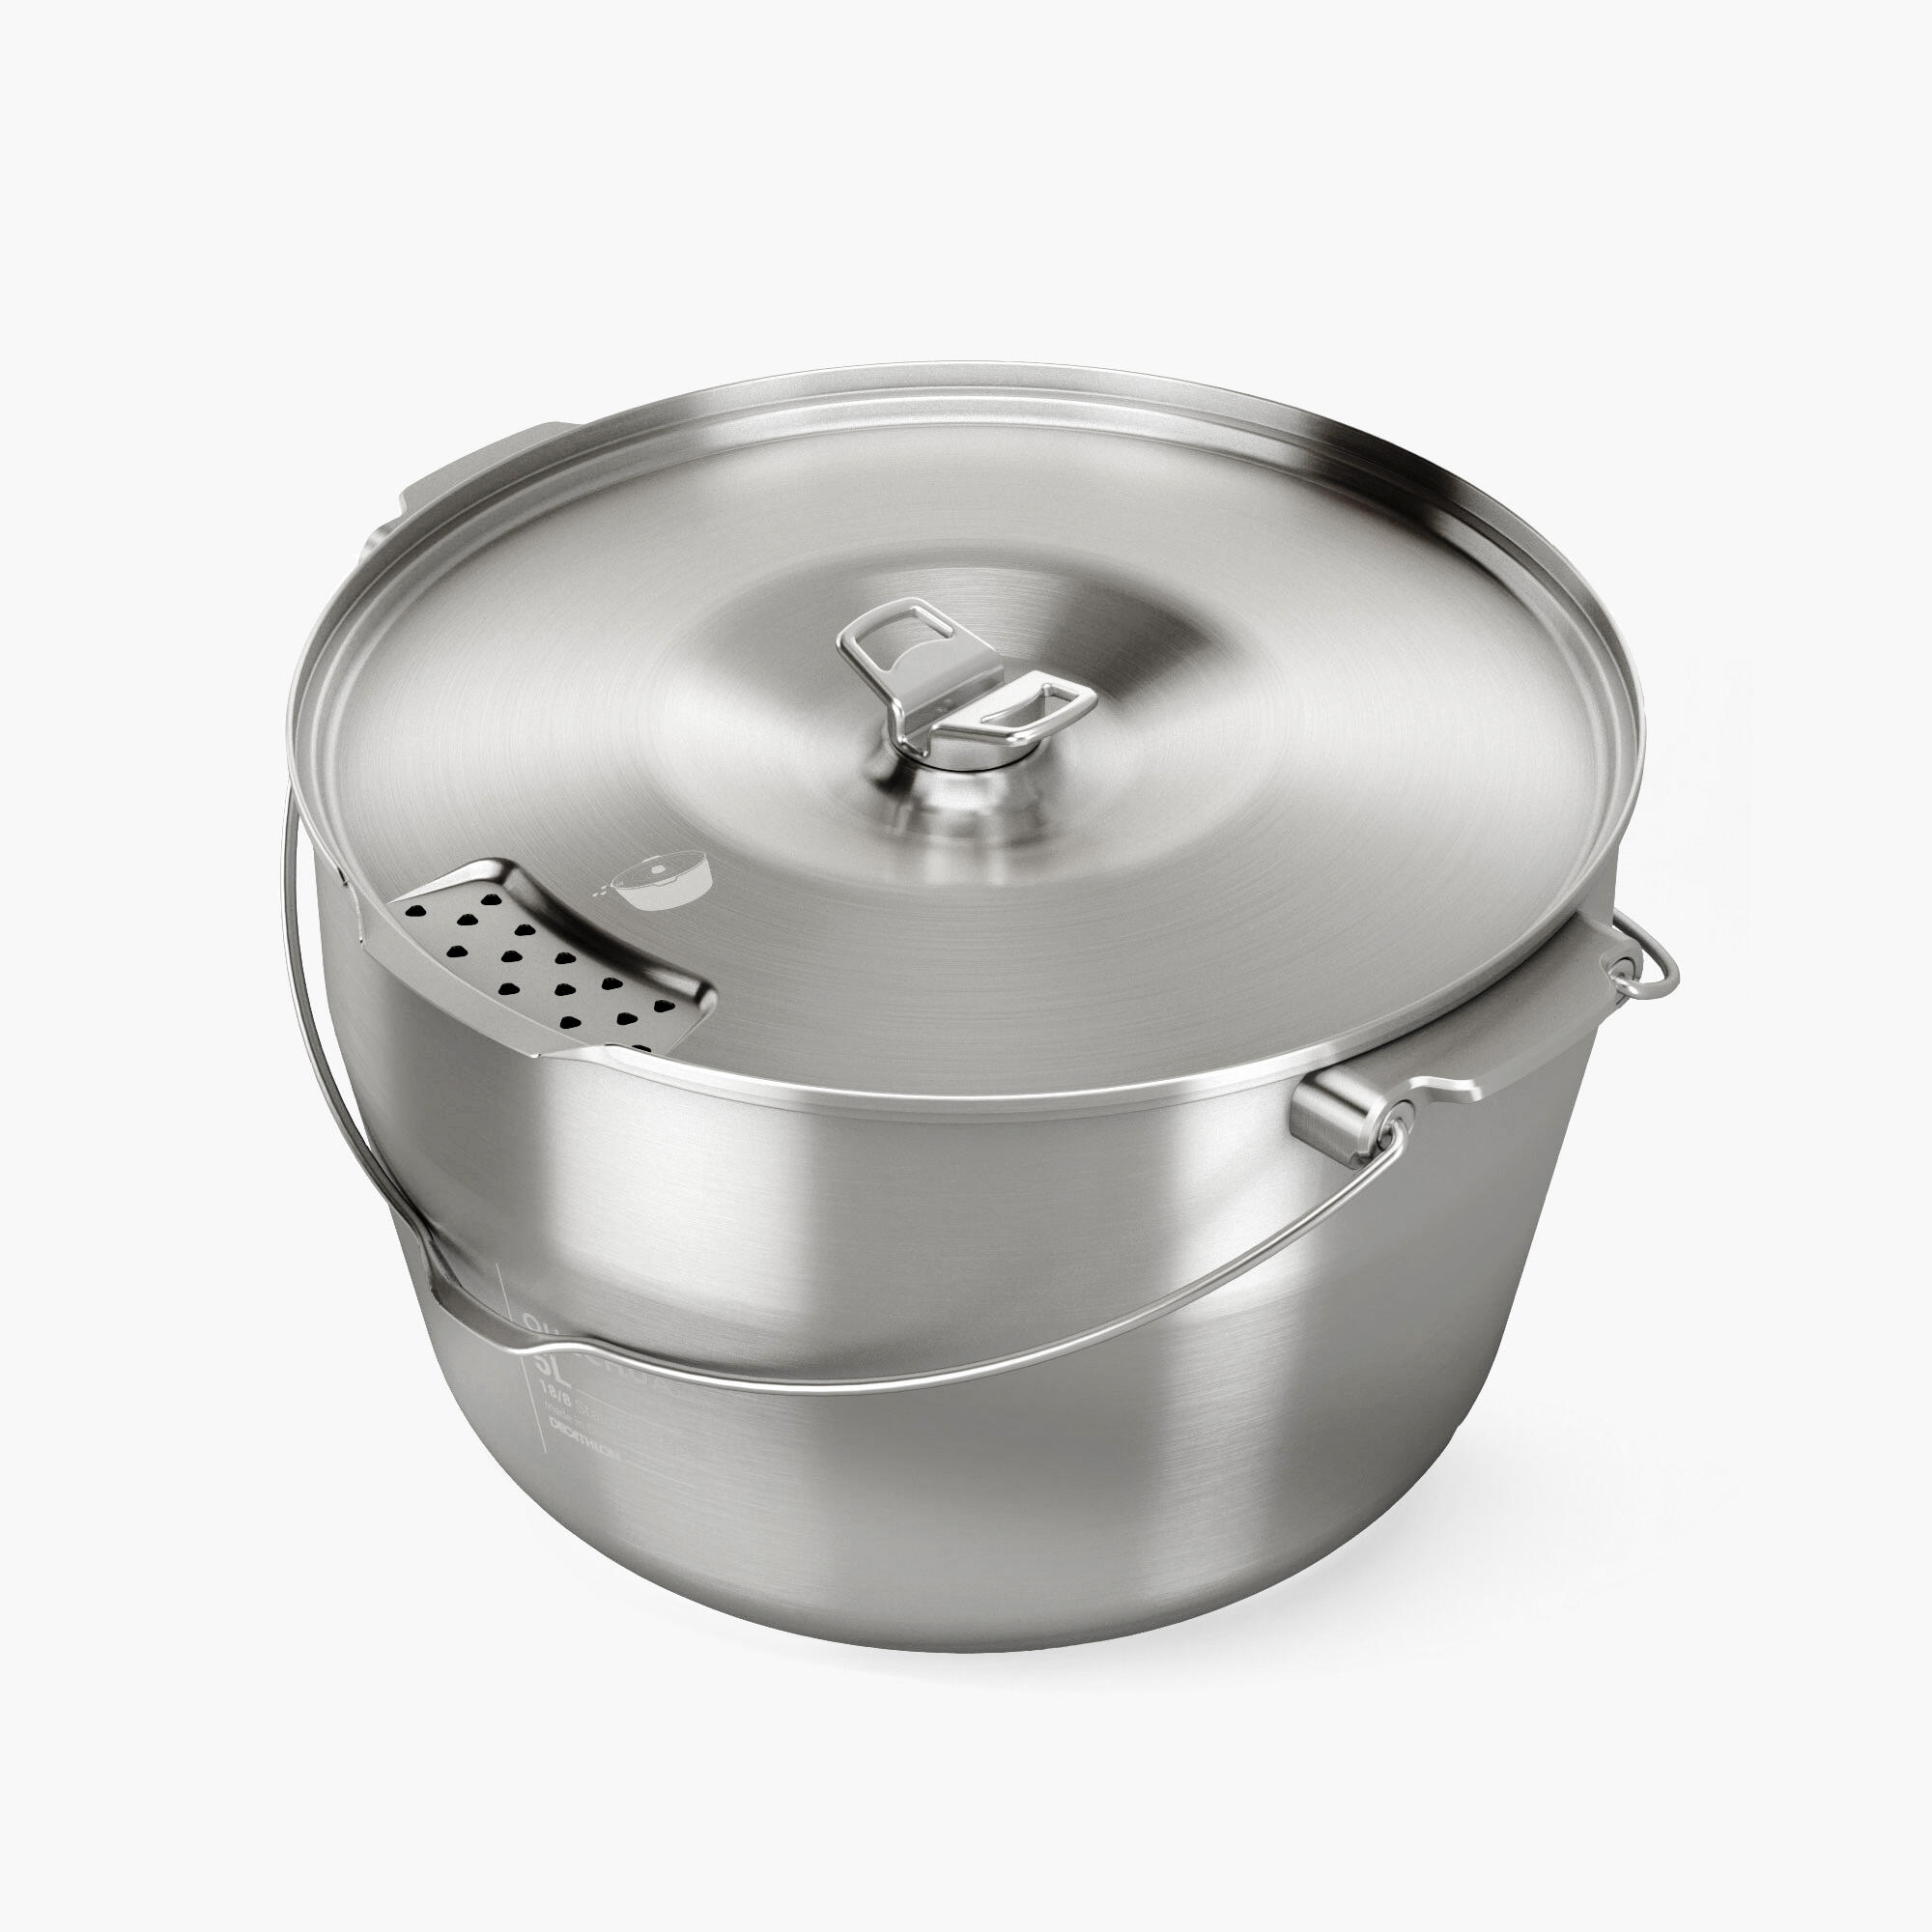 6-People Camping Cooking Pot - Stainless Steel - 5 Litres 5/9